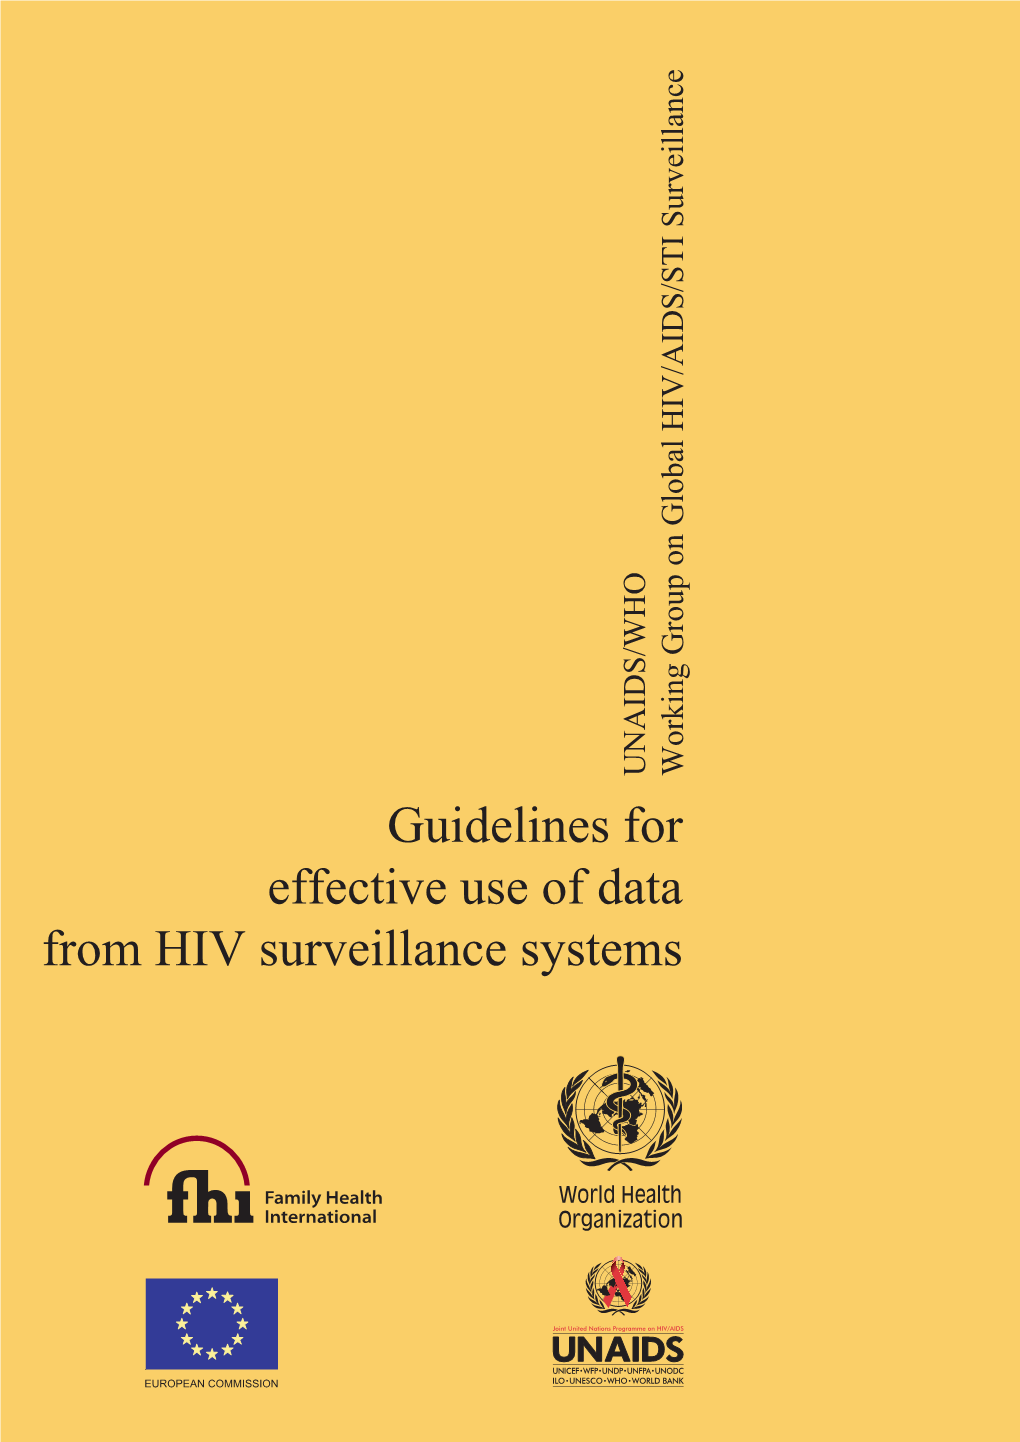 Guidelines for Effective Use of Data from HIV Surveillance Systems